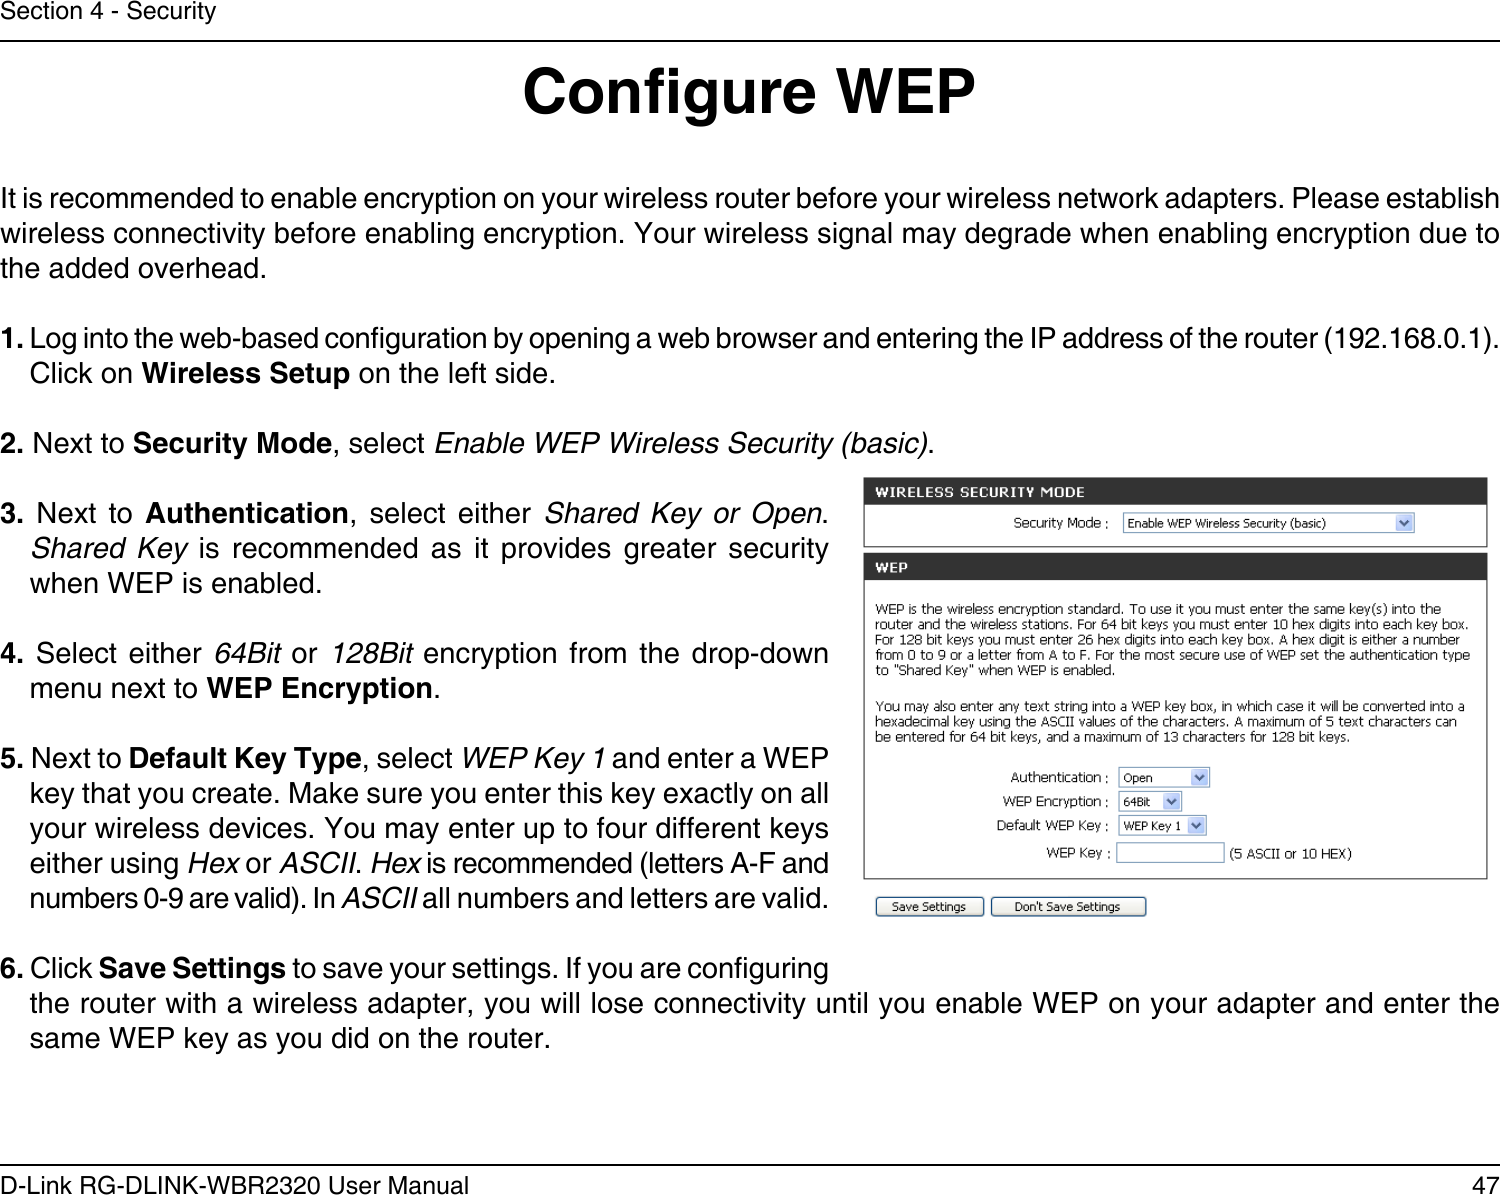 47D-Link RG-DLINK-WBR2320 User ManualSection 4 - SecurityCongure WEPIt is recommended to enable encryption on your wireless router before your wireless network adapters. Please establish wireless connectivity before enabling encryption. Your wireless signal may degrade when enabling encryption due to the added overhead.1. Log into the web-based conguration by opening a web browser and entering the IP address of the router (192.168.0.1).  Click on Wireless Setup on the left side.2. Next to Security Mode, select Enable WEP Wireless Security (basic).3.  Next  to  Authentication,  select  either  Shared  Key  or  Open. Shared  Key  is  recommended  as  it  provides  greater  security when WEP is enabled.4.  Select  either 64Bit  or 128Bit  encryption from  the drop-down menu next to WEP Encryption. 5. Next to Default Key Type, select WEP Key 1 and enter a WEP key that you create. Make sure you enter this key exactly on all your wireless devices. You may enter up to four different keys either using Hex or ASCII. Hex is recommended (letters A-F and numbers 0-9 are valid). In ASCII all numbers and letters are valid.6. Click Save Settings to save your settings. If you are conguring the router with a wireless adapter, you will lose connectivity until you enable WEP on your adapter and enter the same WEP key as you did on the router.